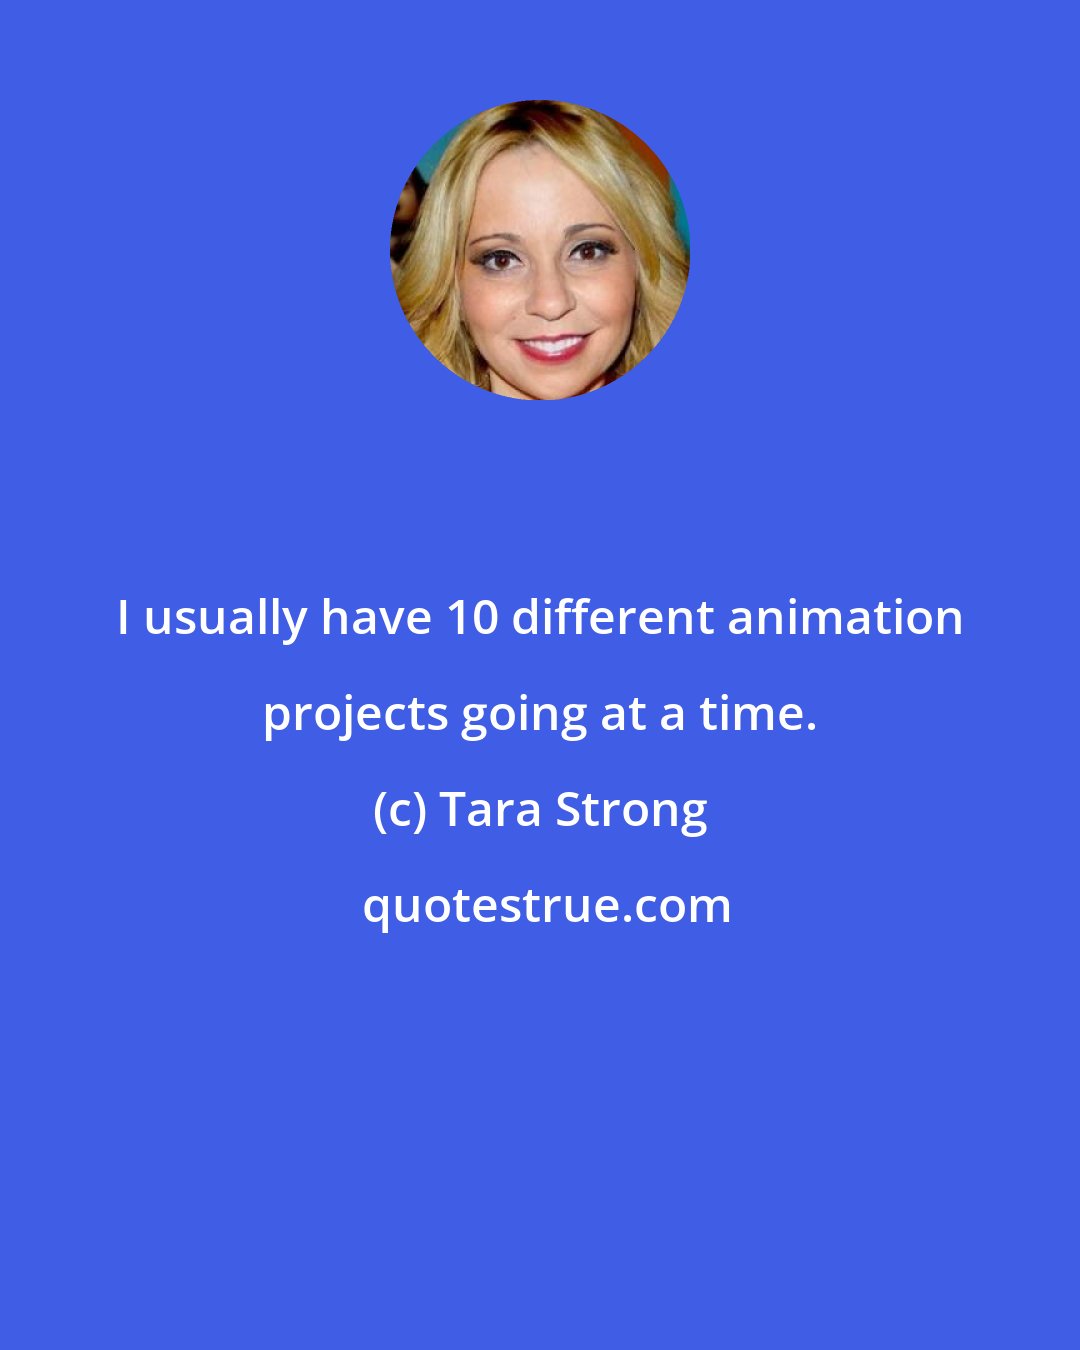 Tara Strong: I usually have 10 different animation projects going at a time.